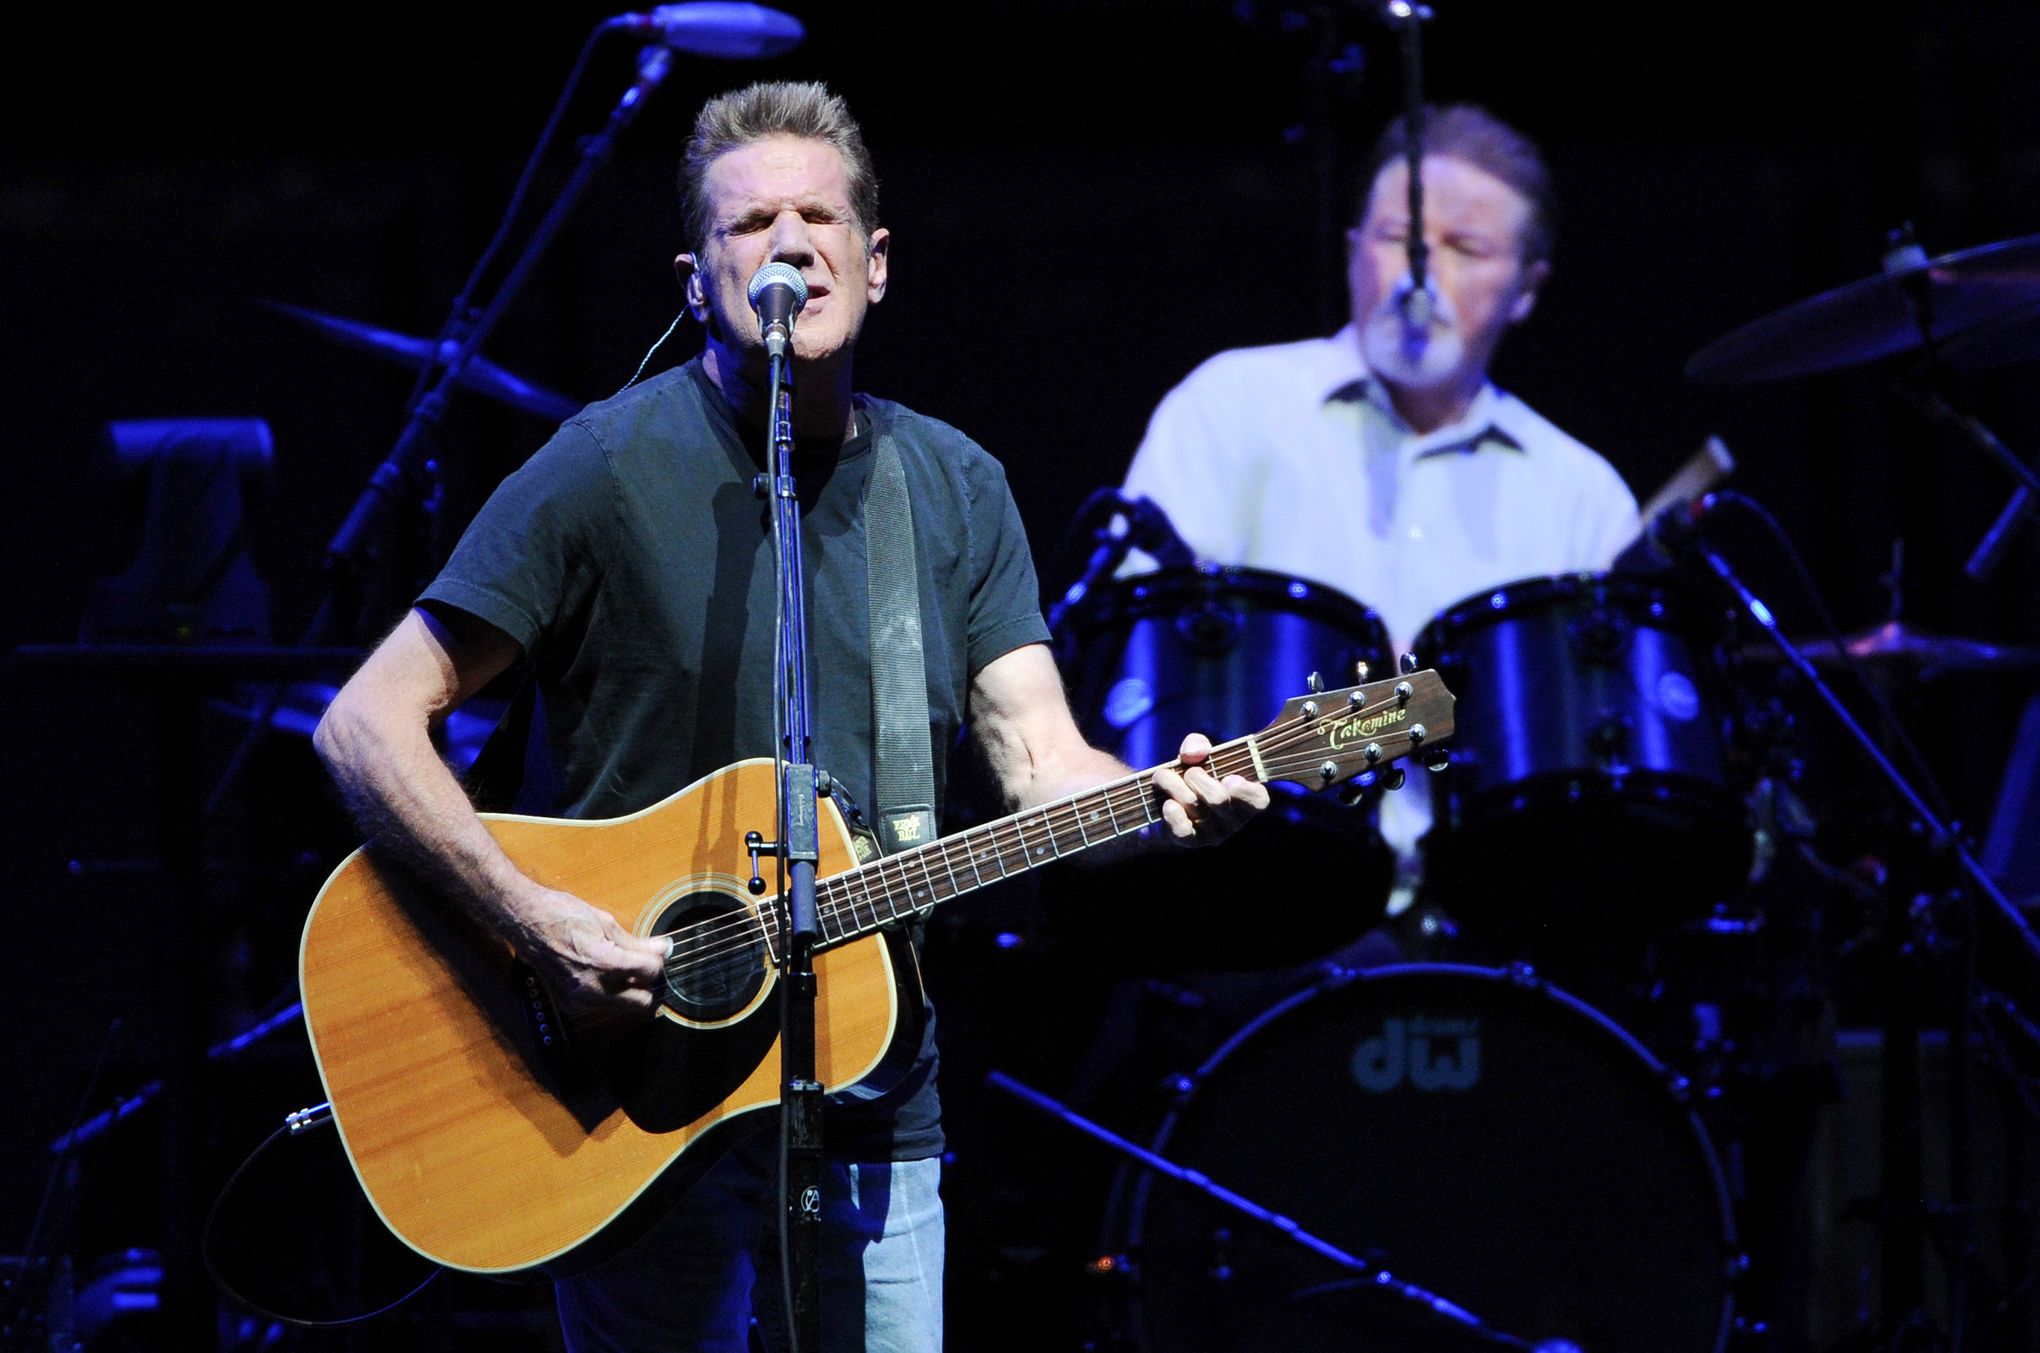 Musician, singer, songwriter, and actor, Glenn Frey, best known as